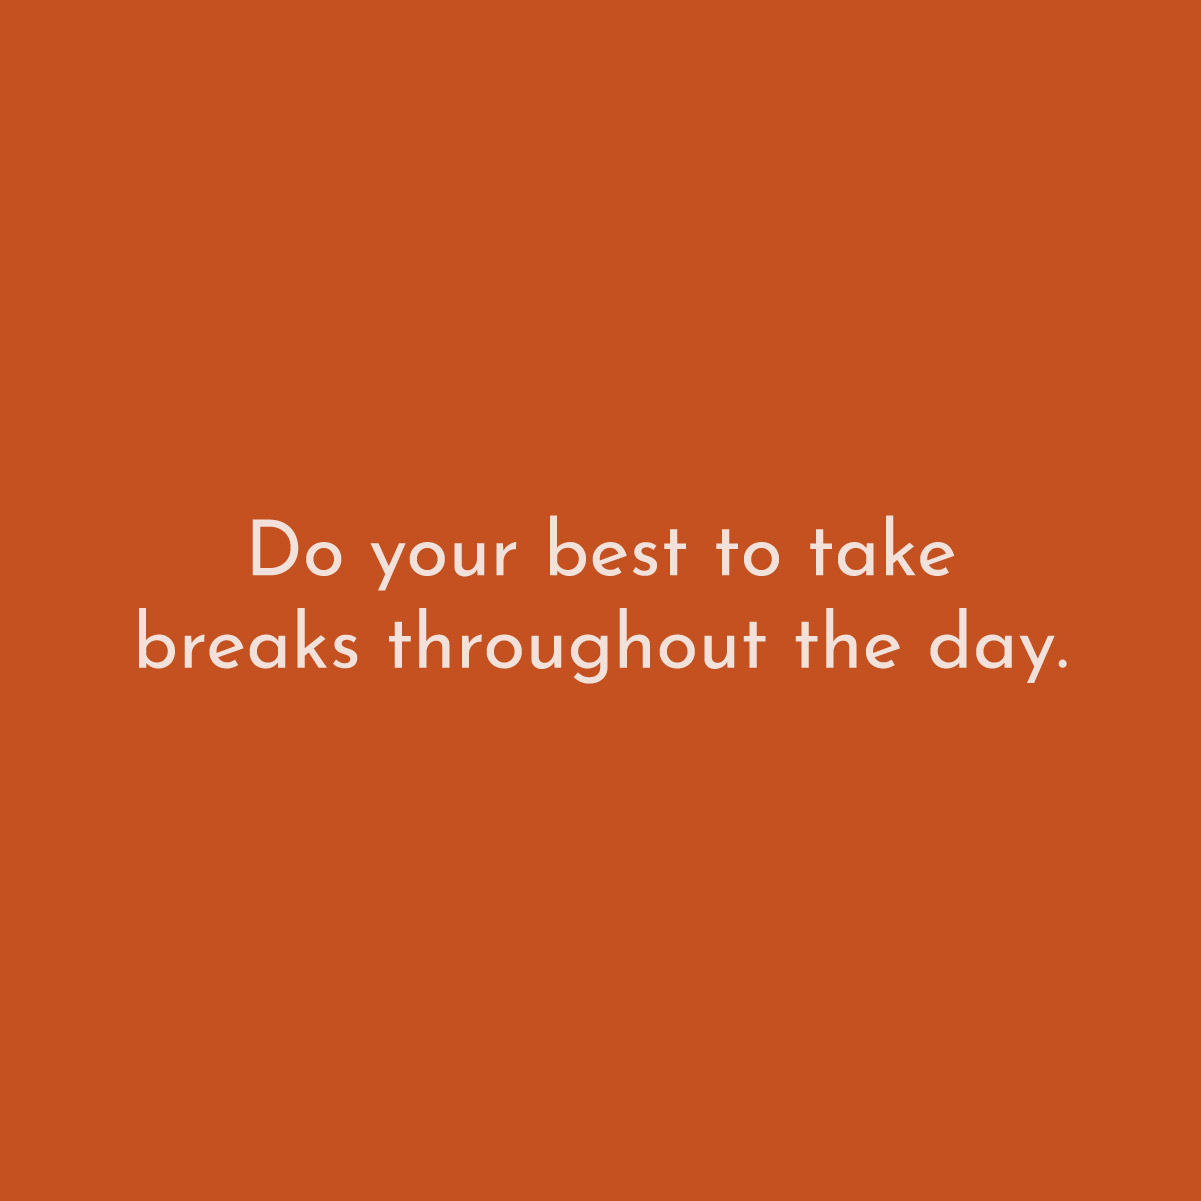 Do your best to take breaks throughout the day.